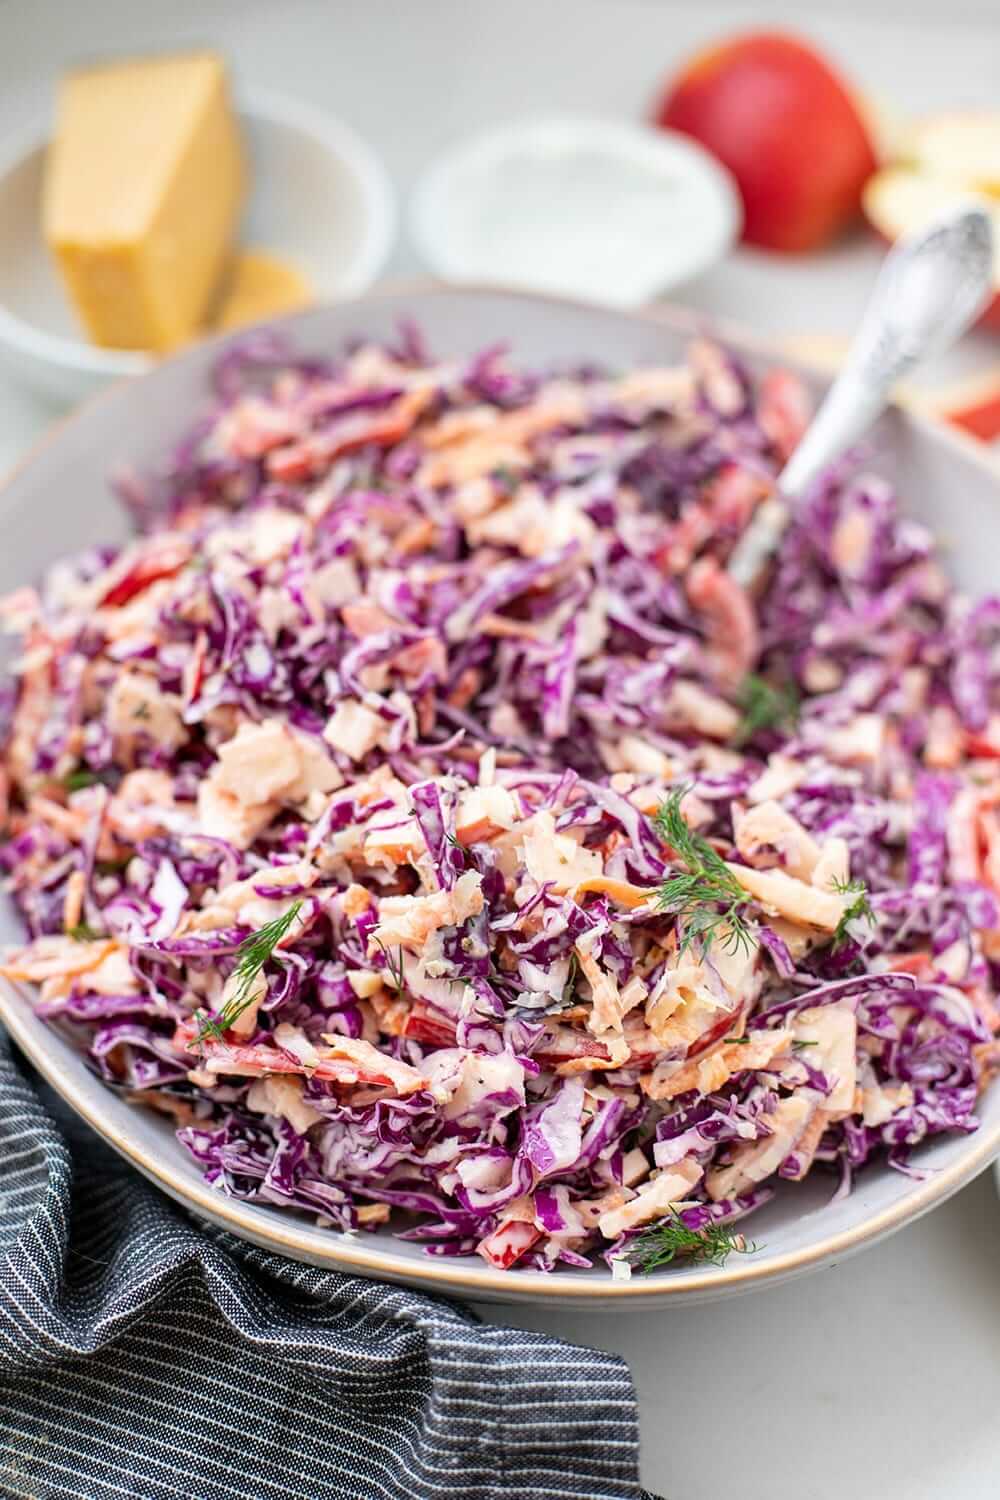 large bowl filled with red cabbage slaw